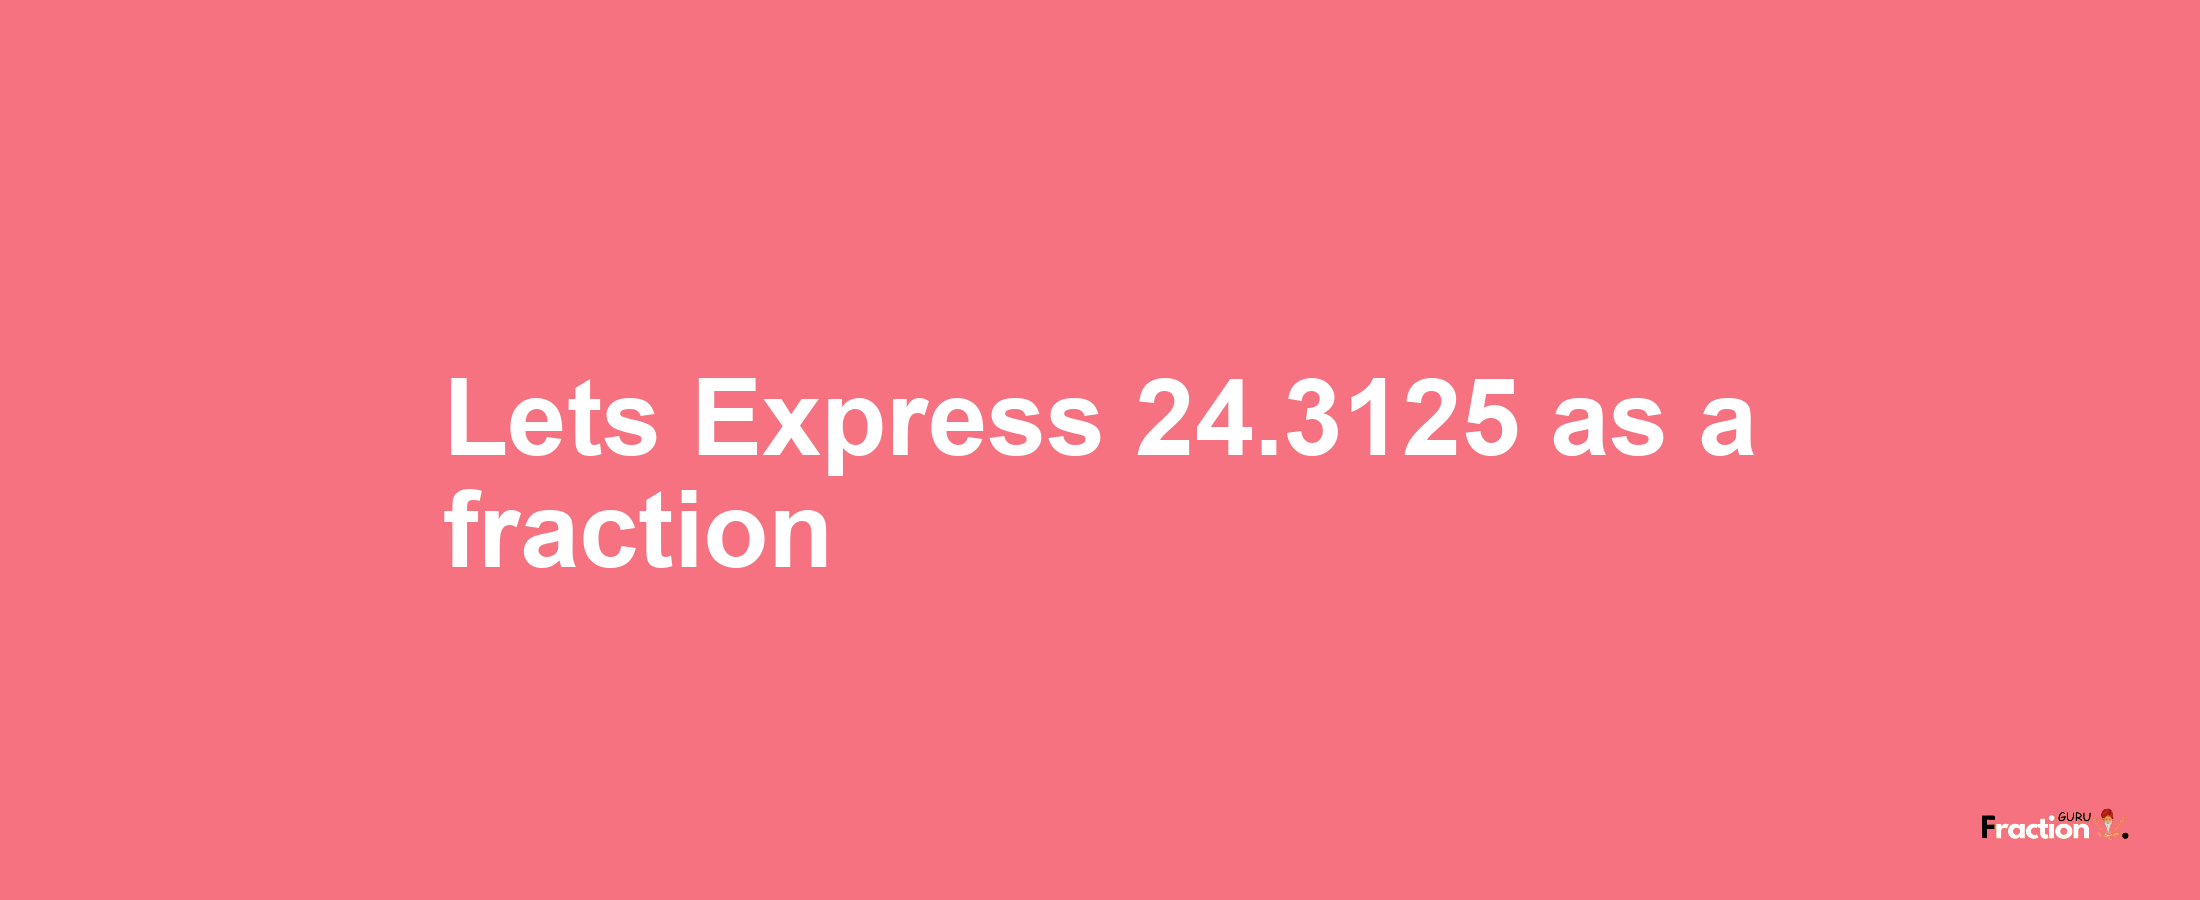 Lets Express 24.3125 as afraction